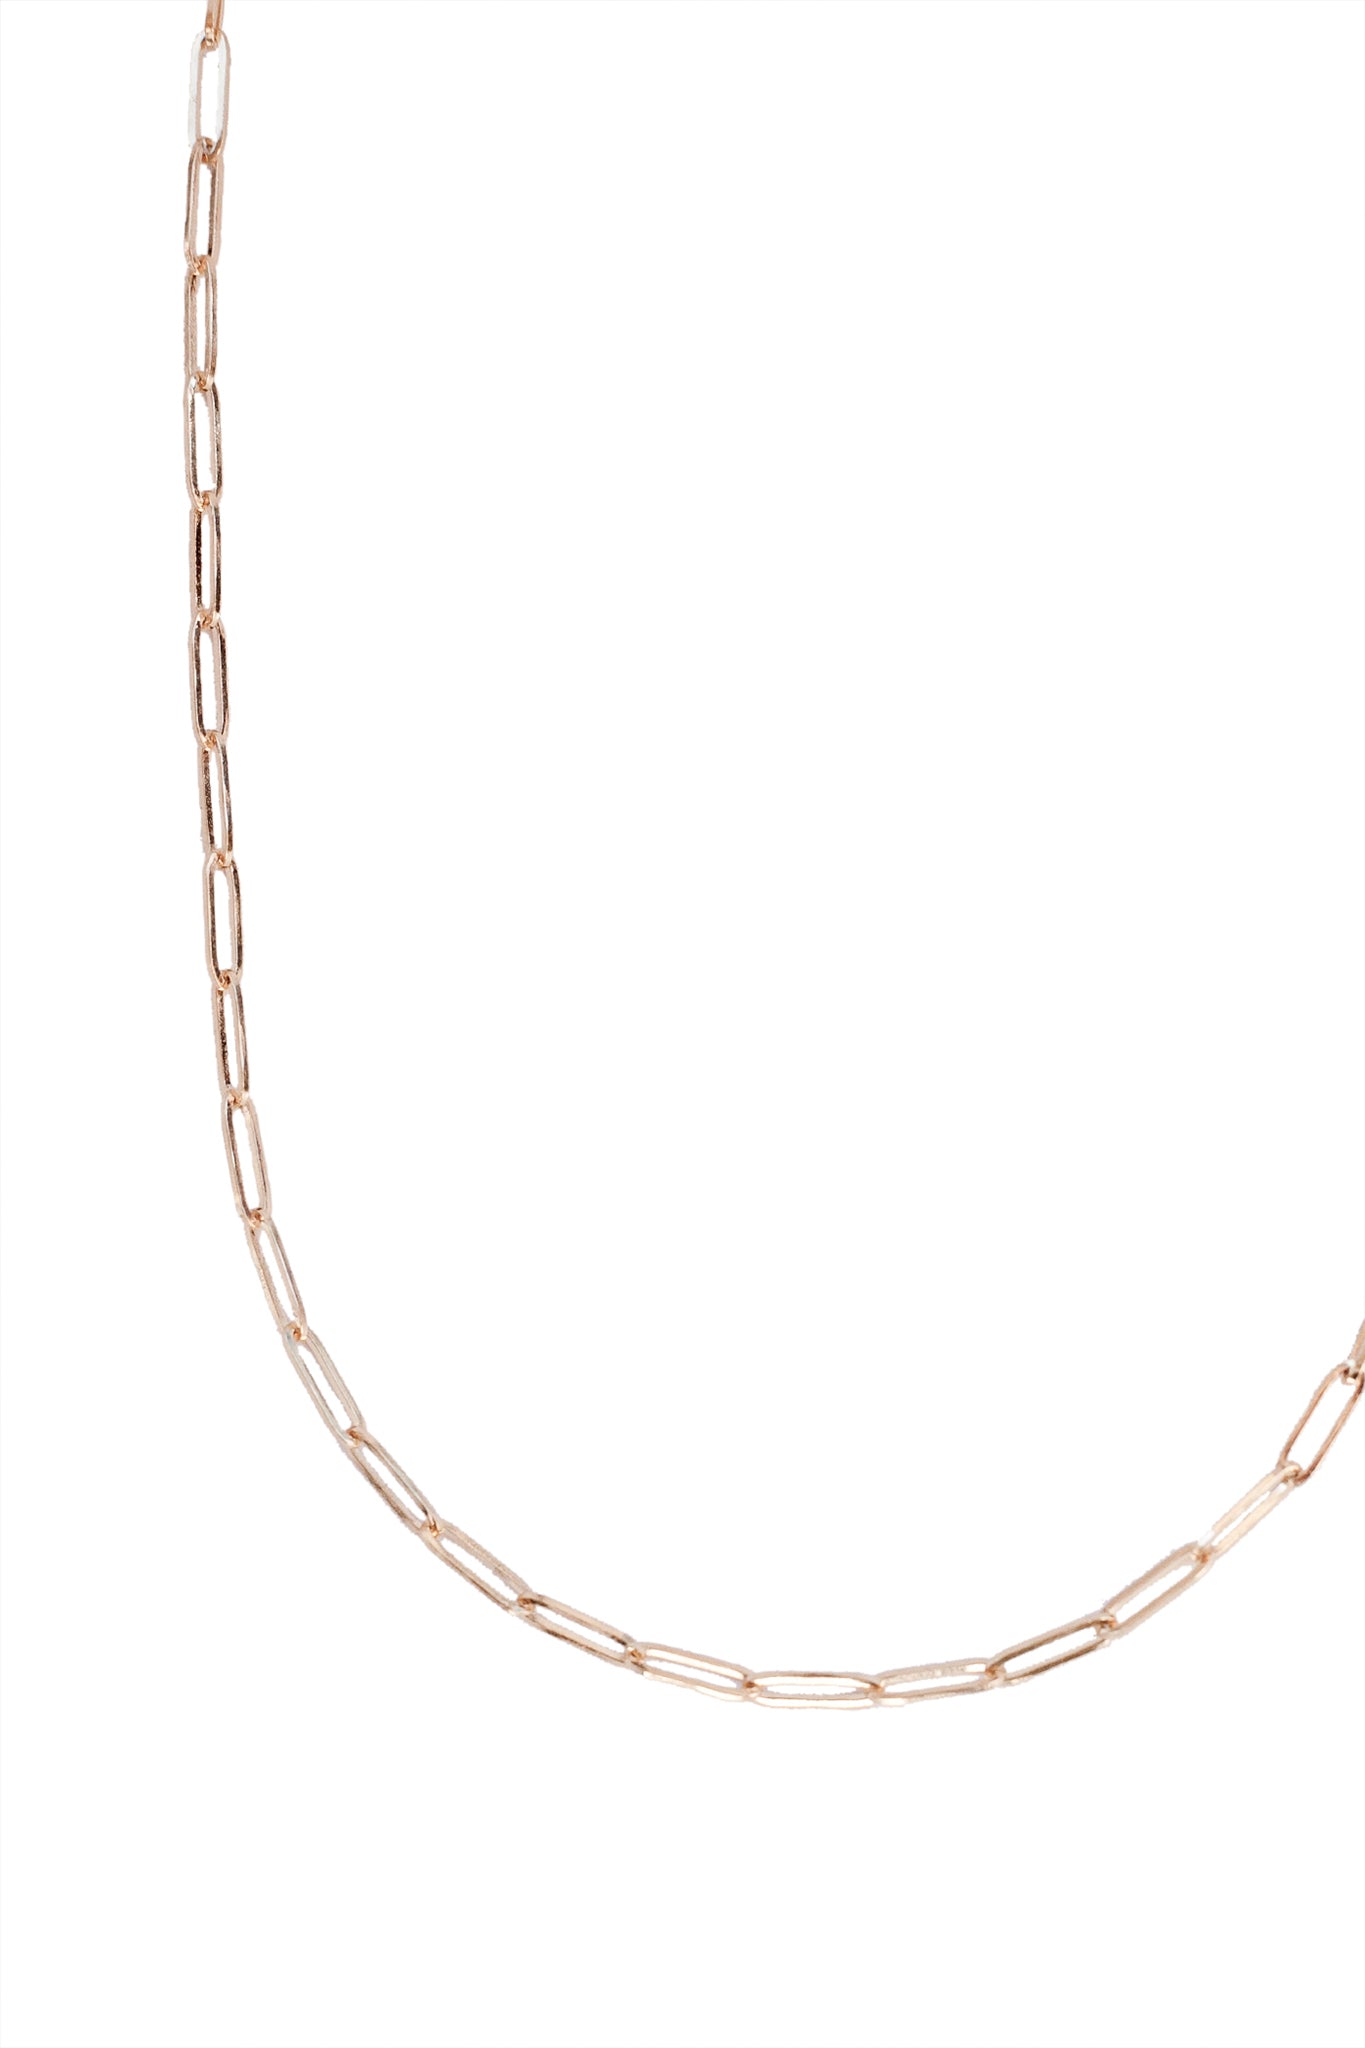 Heather Gardner Paloma Necklace in Yellow Gold - 18"